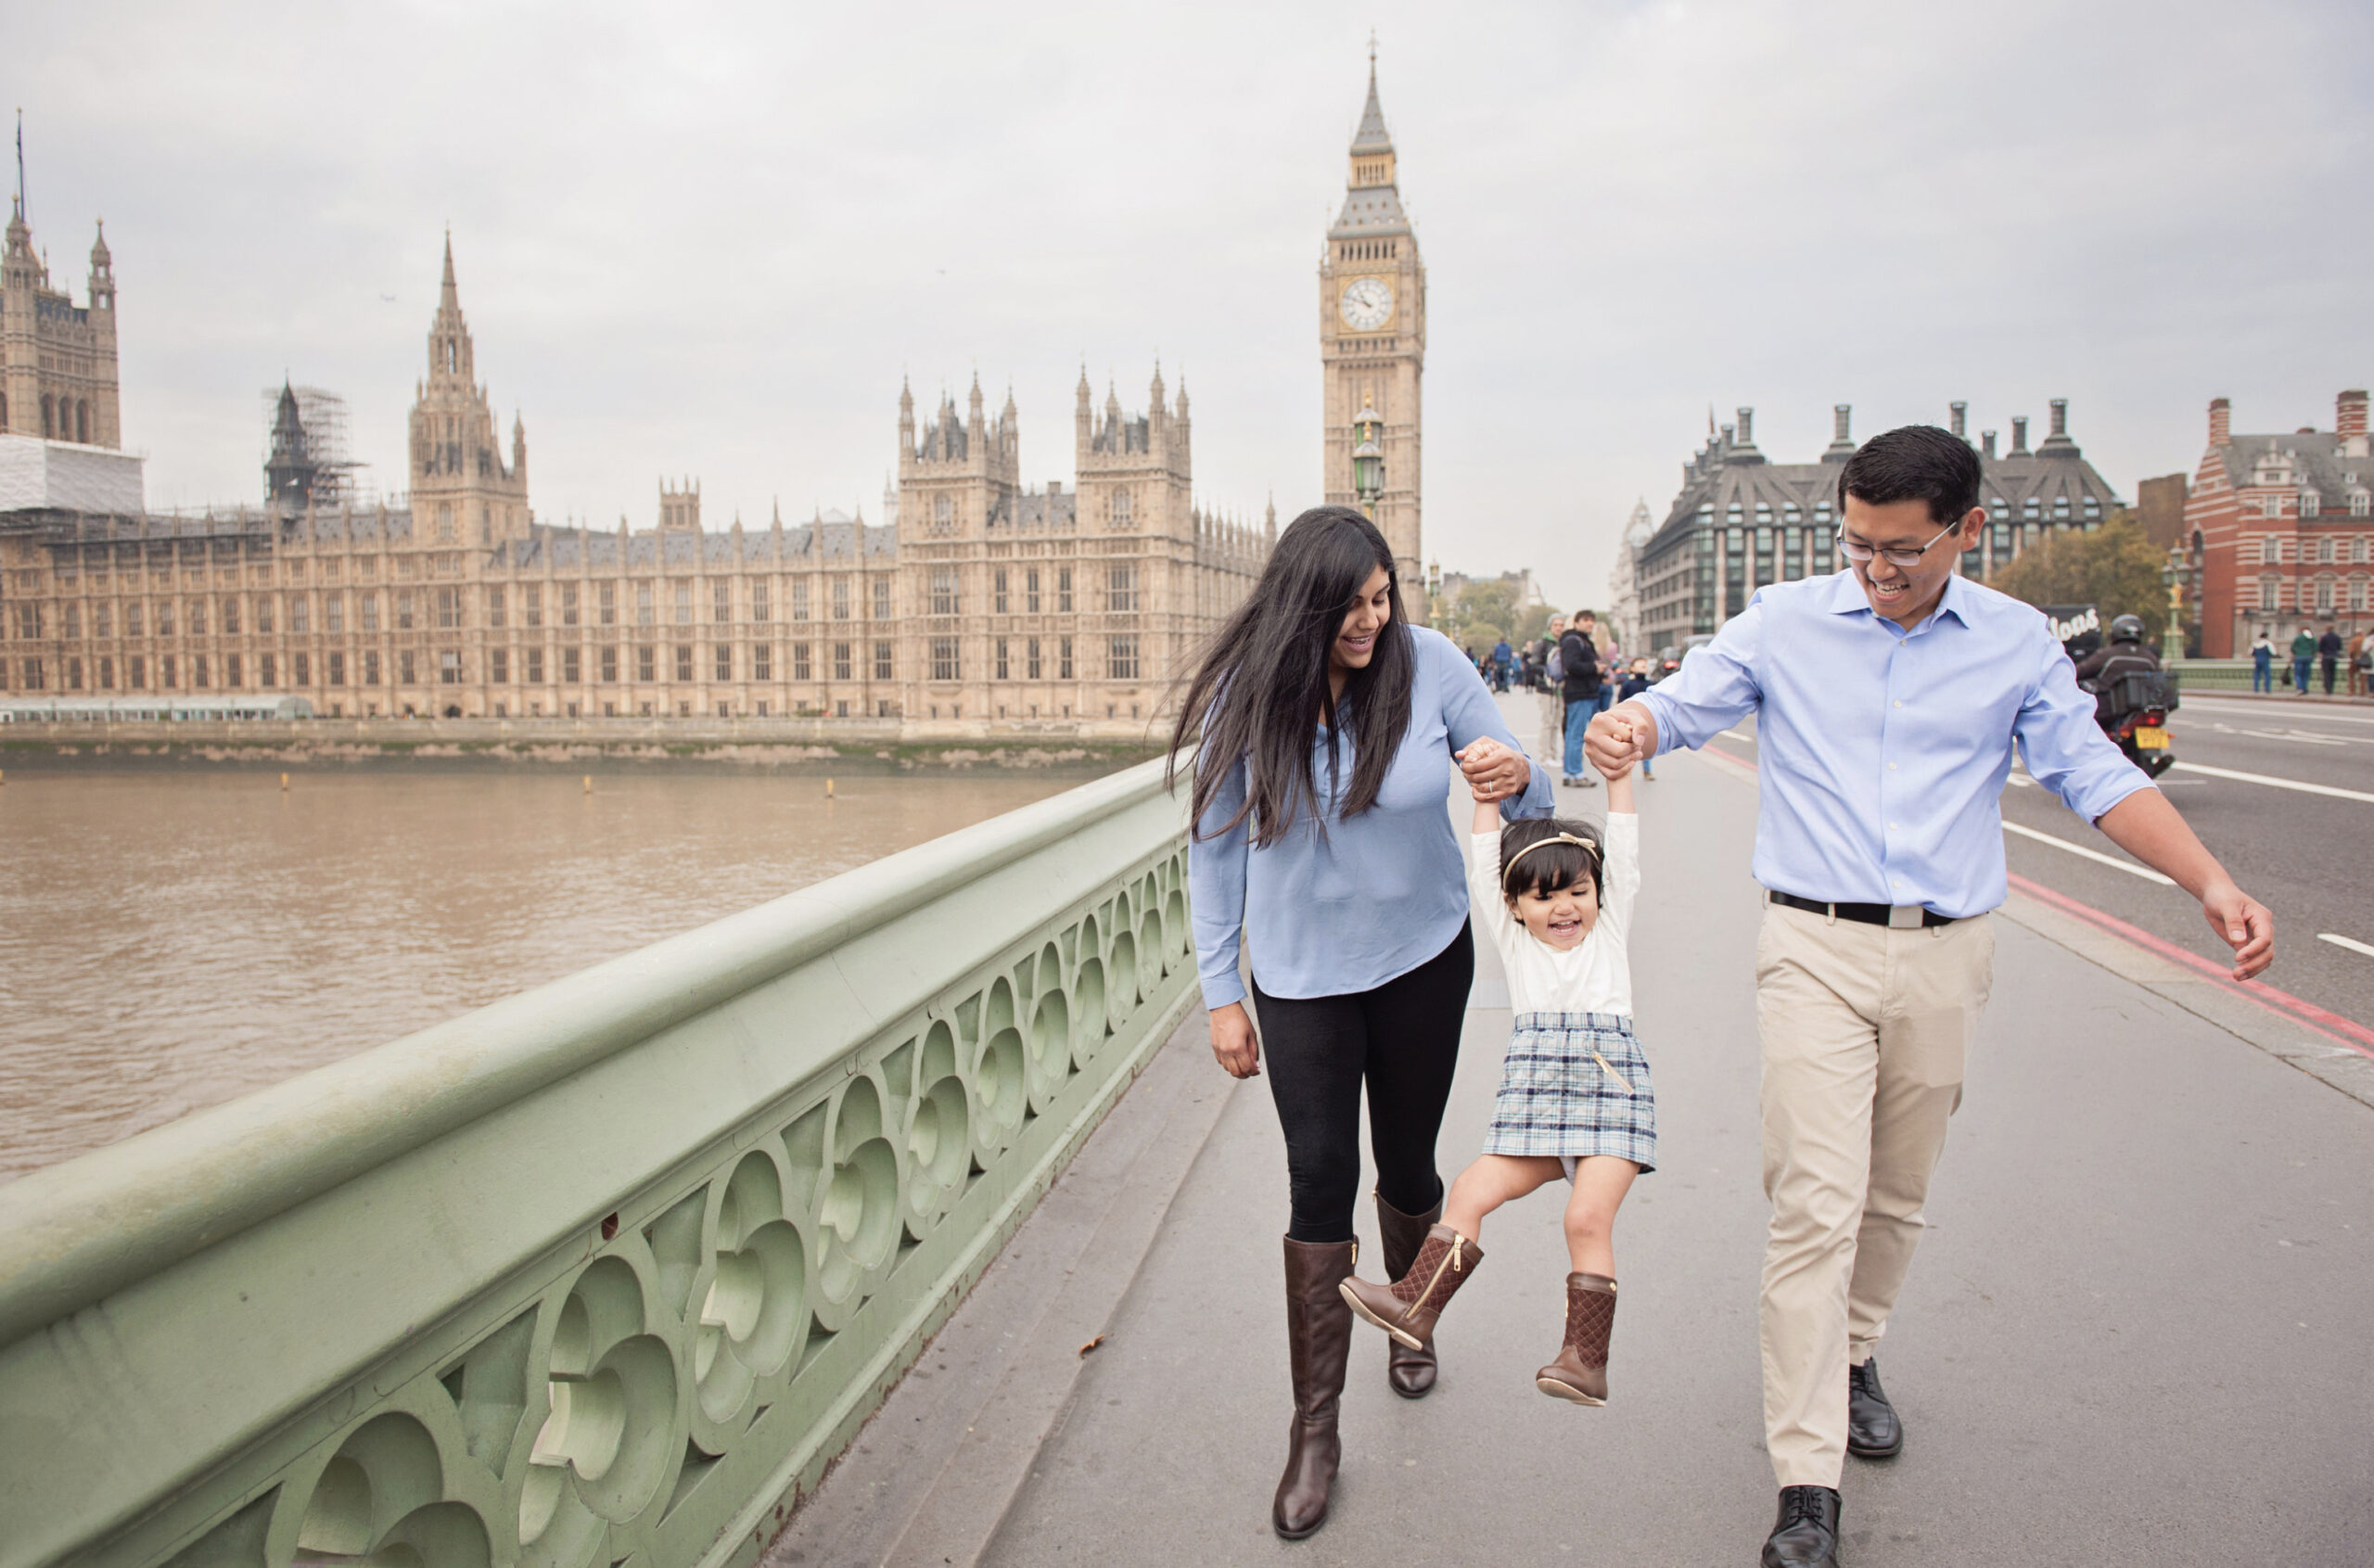 A family swing their little girl on Westminster Bridge during a London vacation photo shoot with Big Ben and the House of Parliament in the background.